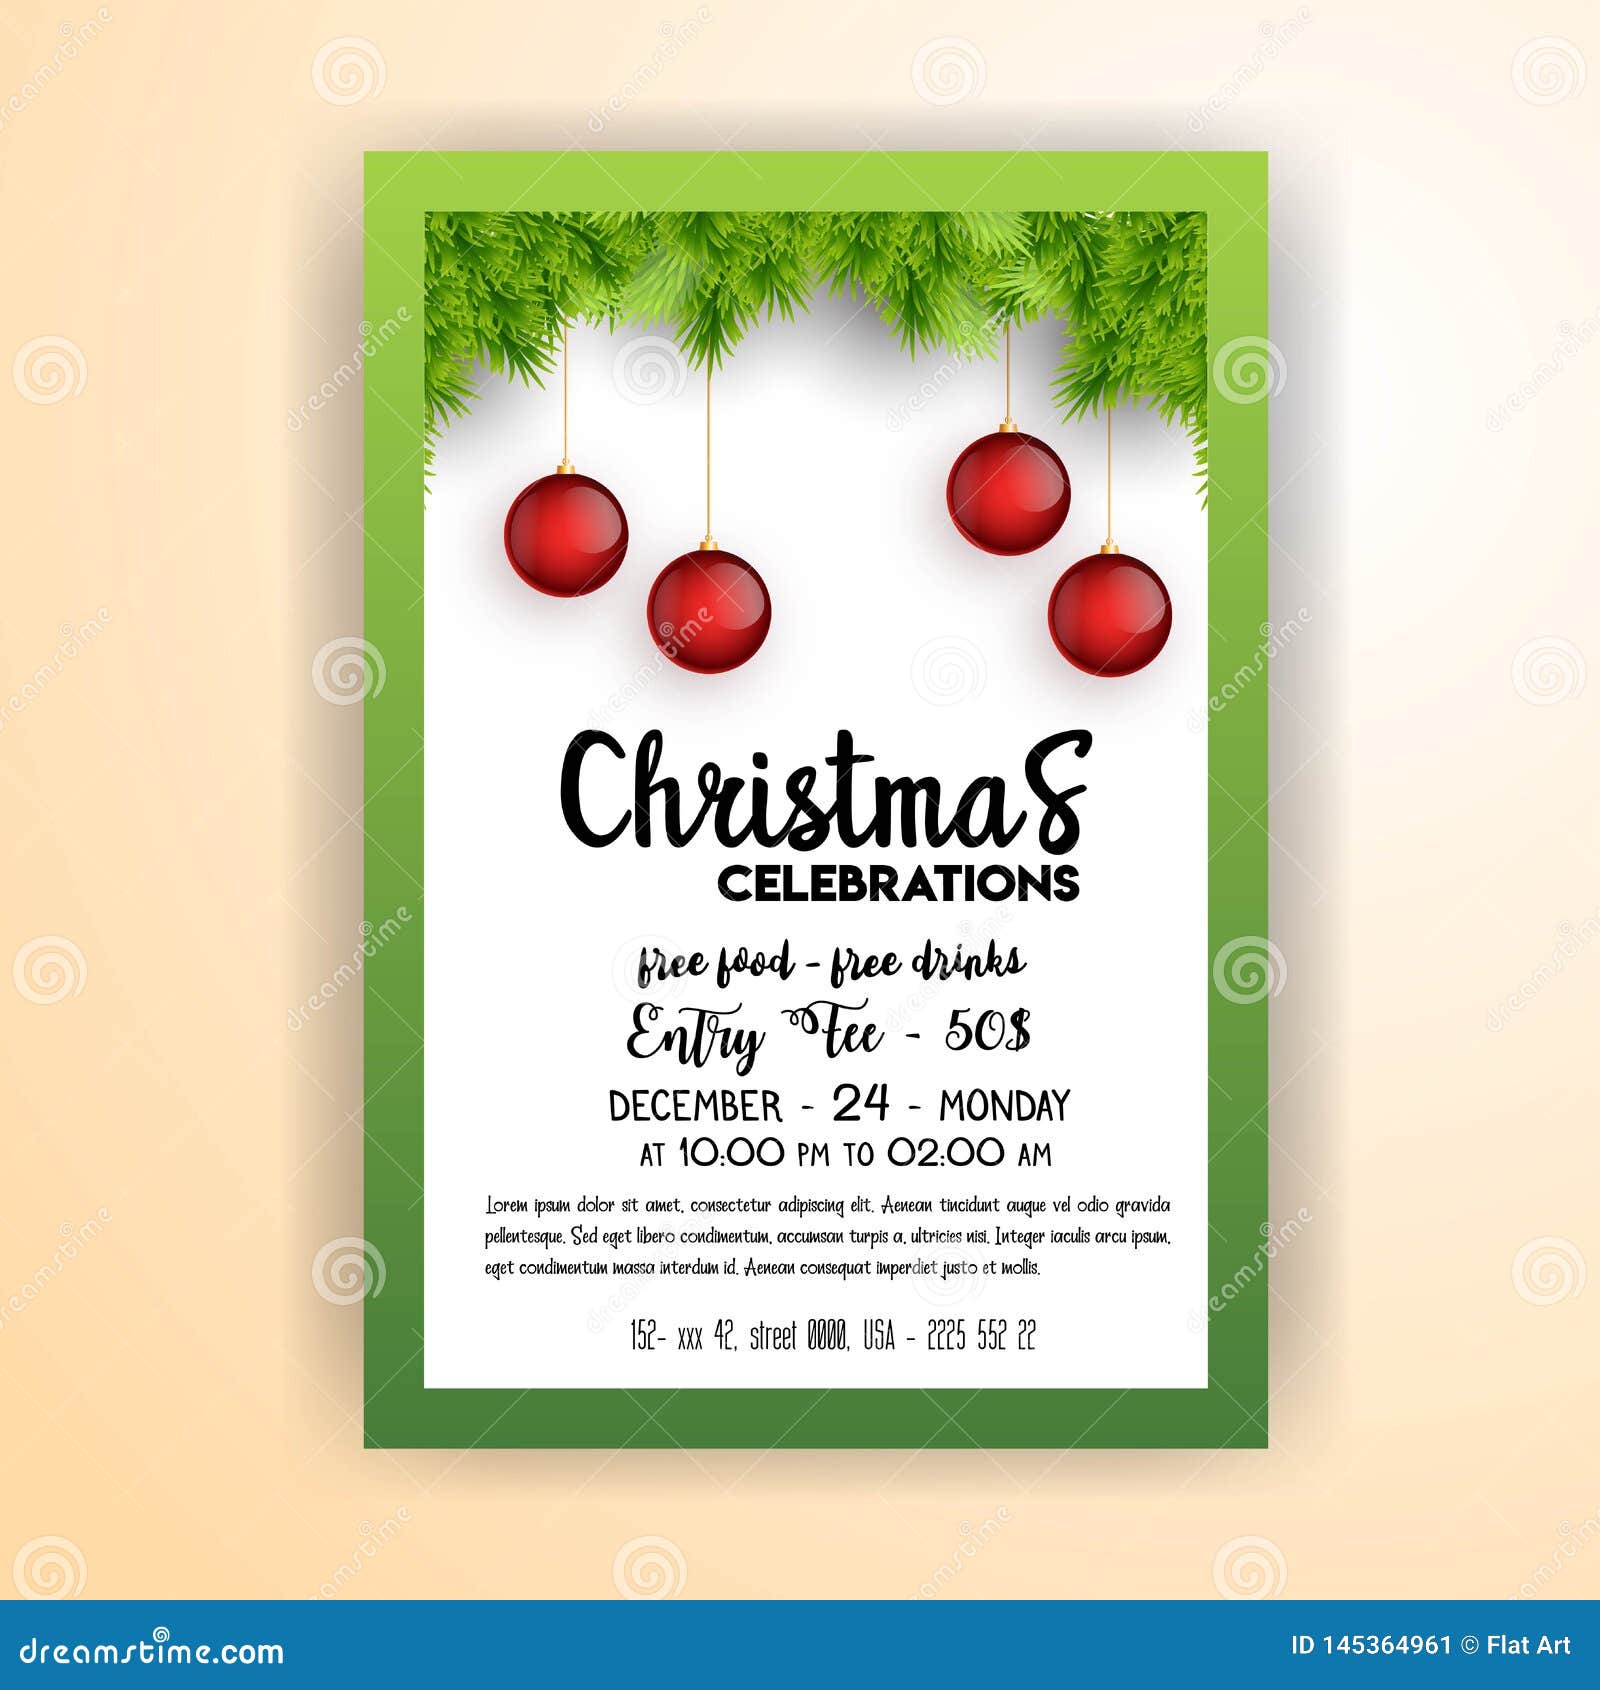 Christmas Party Flyer Template Free Download from thumbs.dreamstime.com